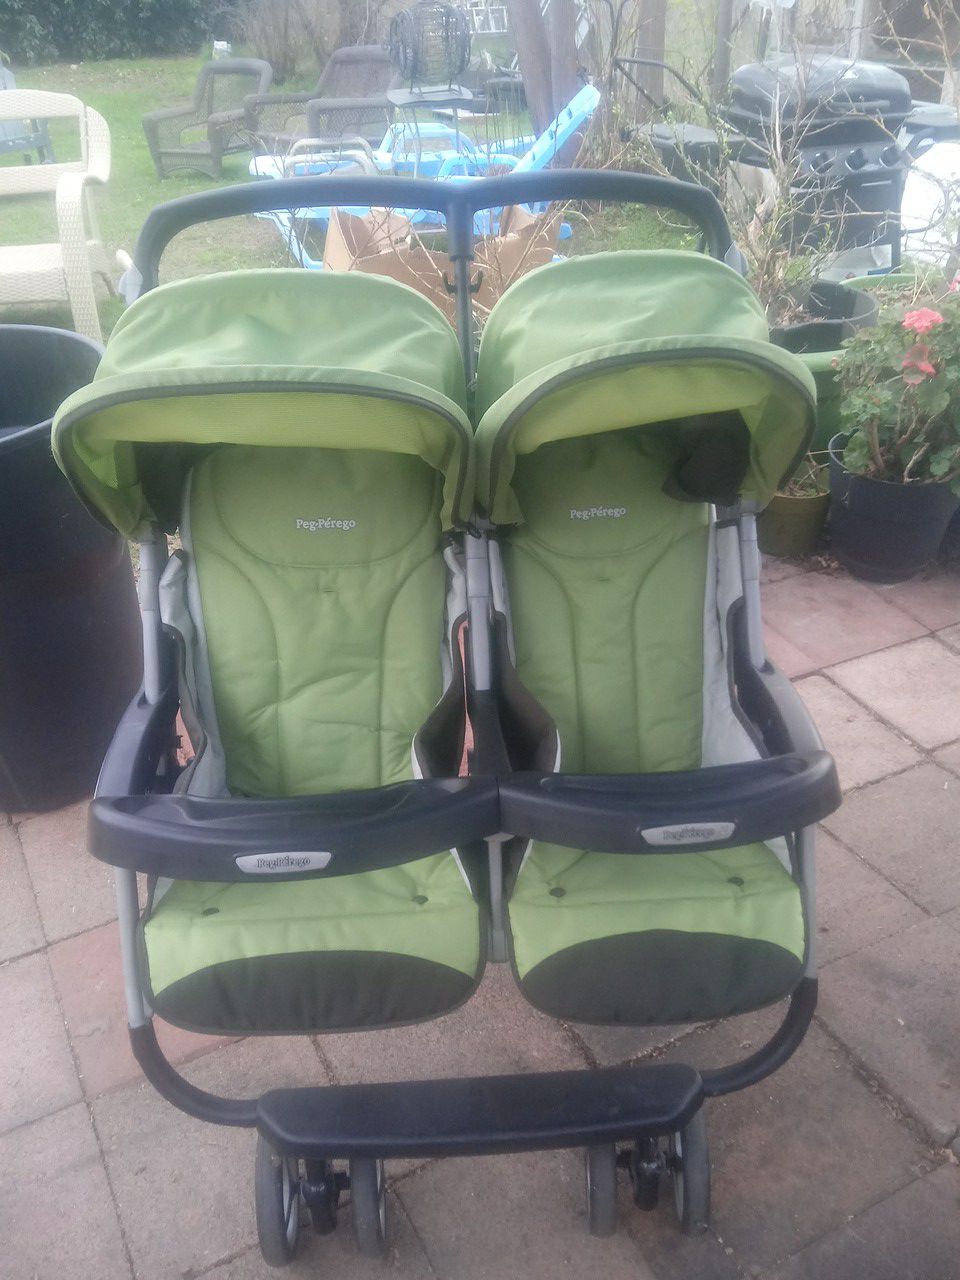 Twins baby strollers. peg Perego